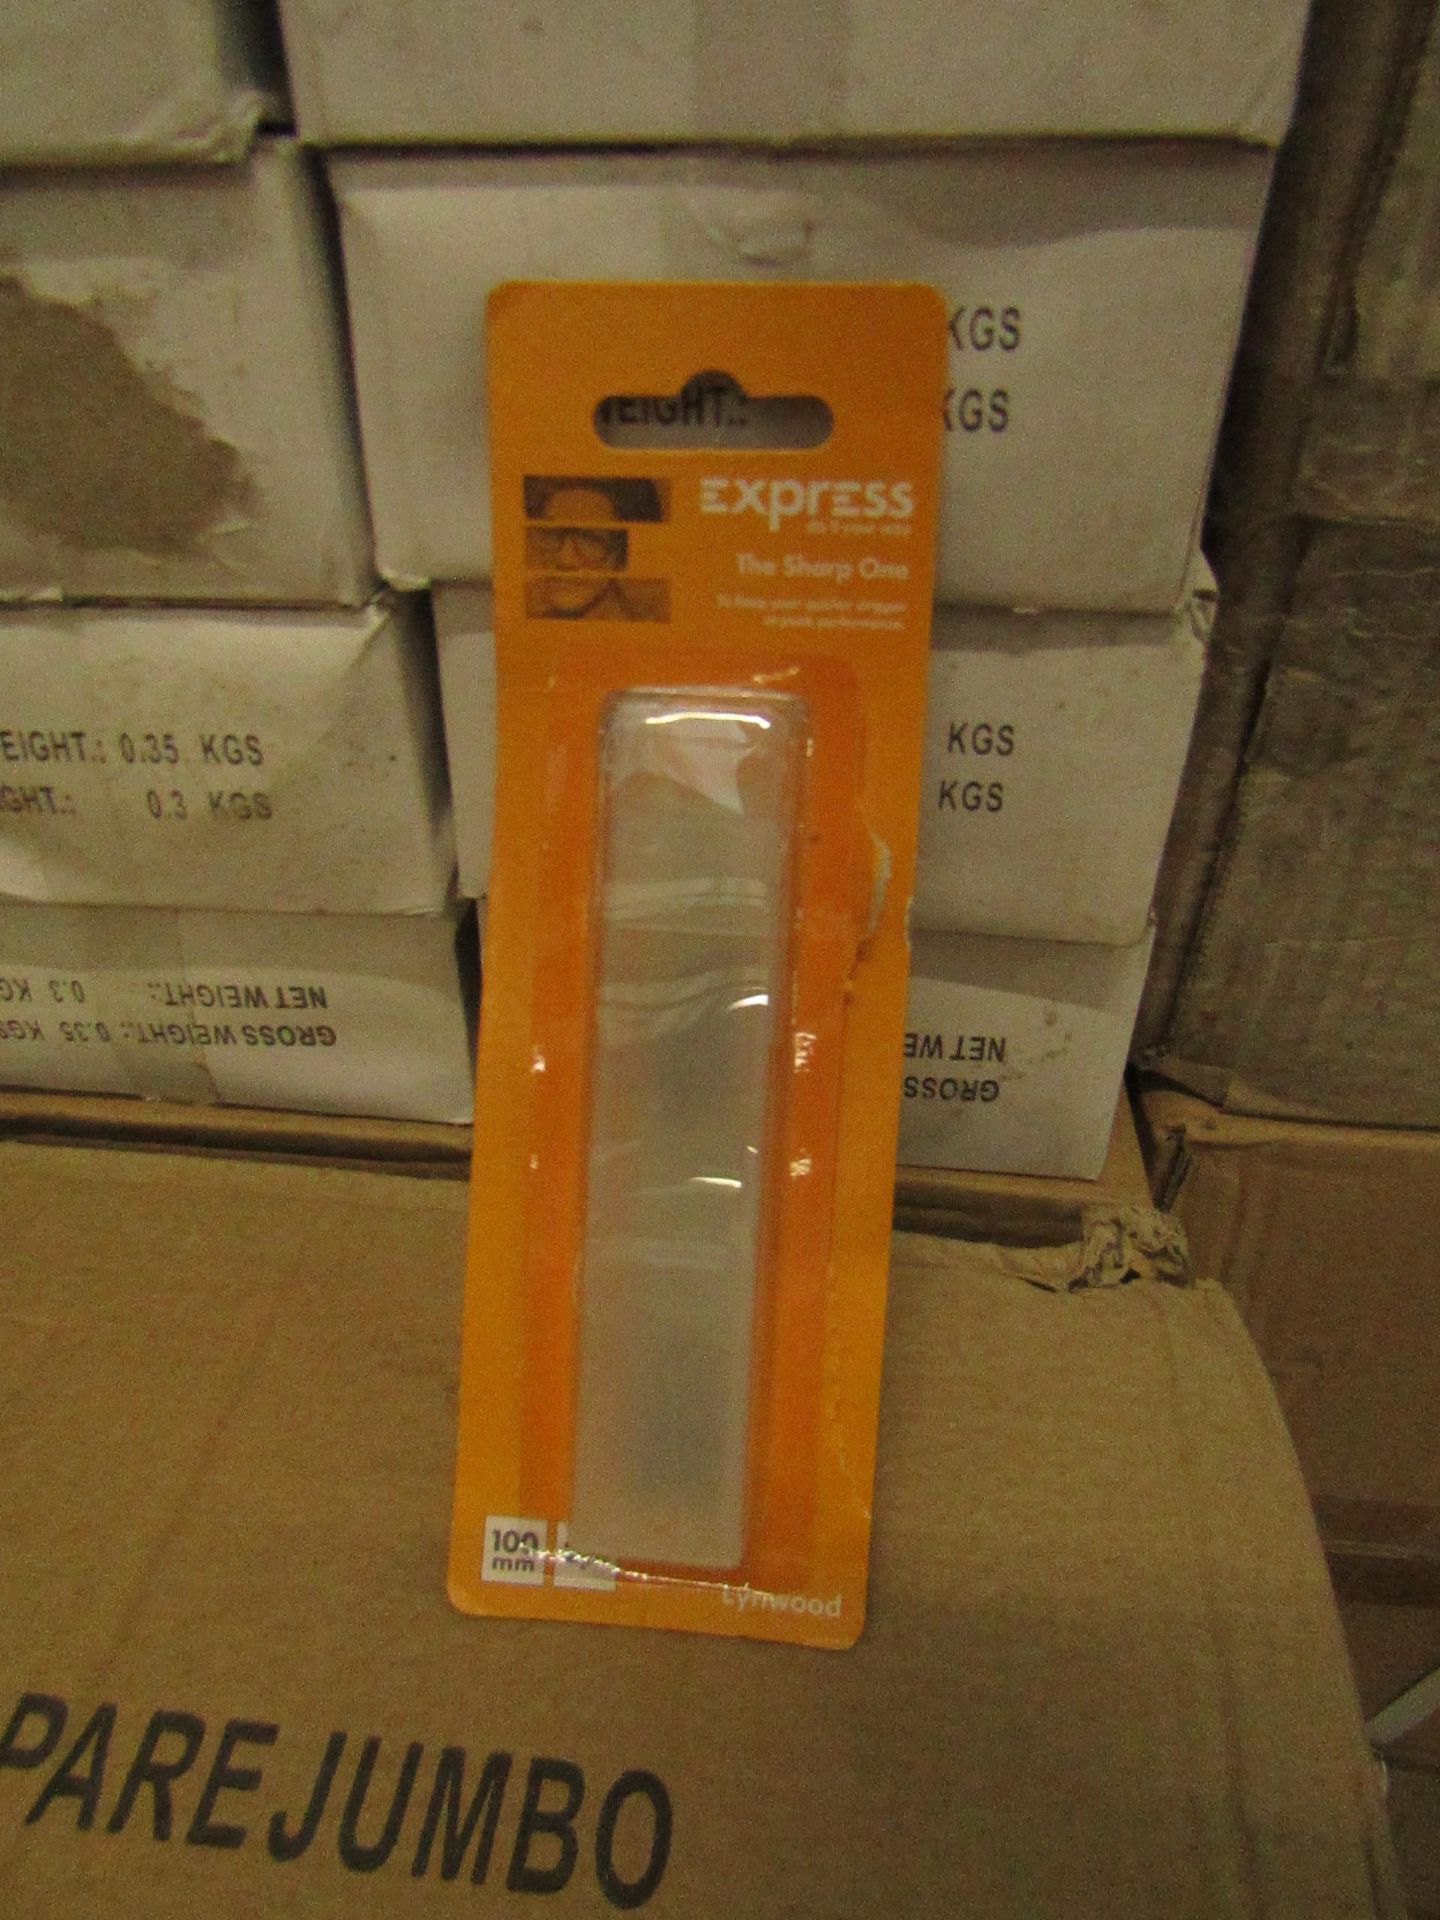 6x Boxes Each Containing - 240x Express - 4" Spare Jumbo Stripping Blades - All New & Boxed.